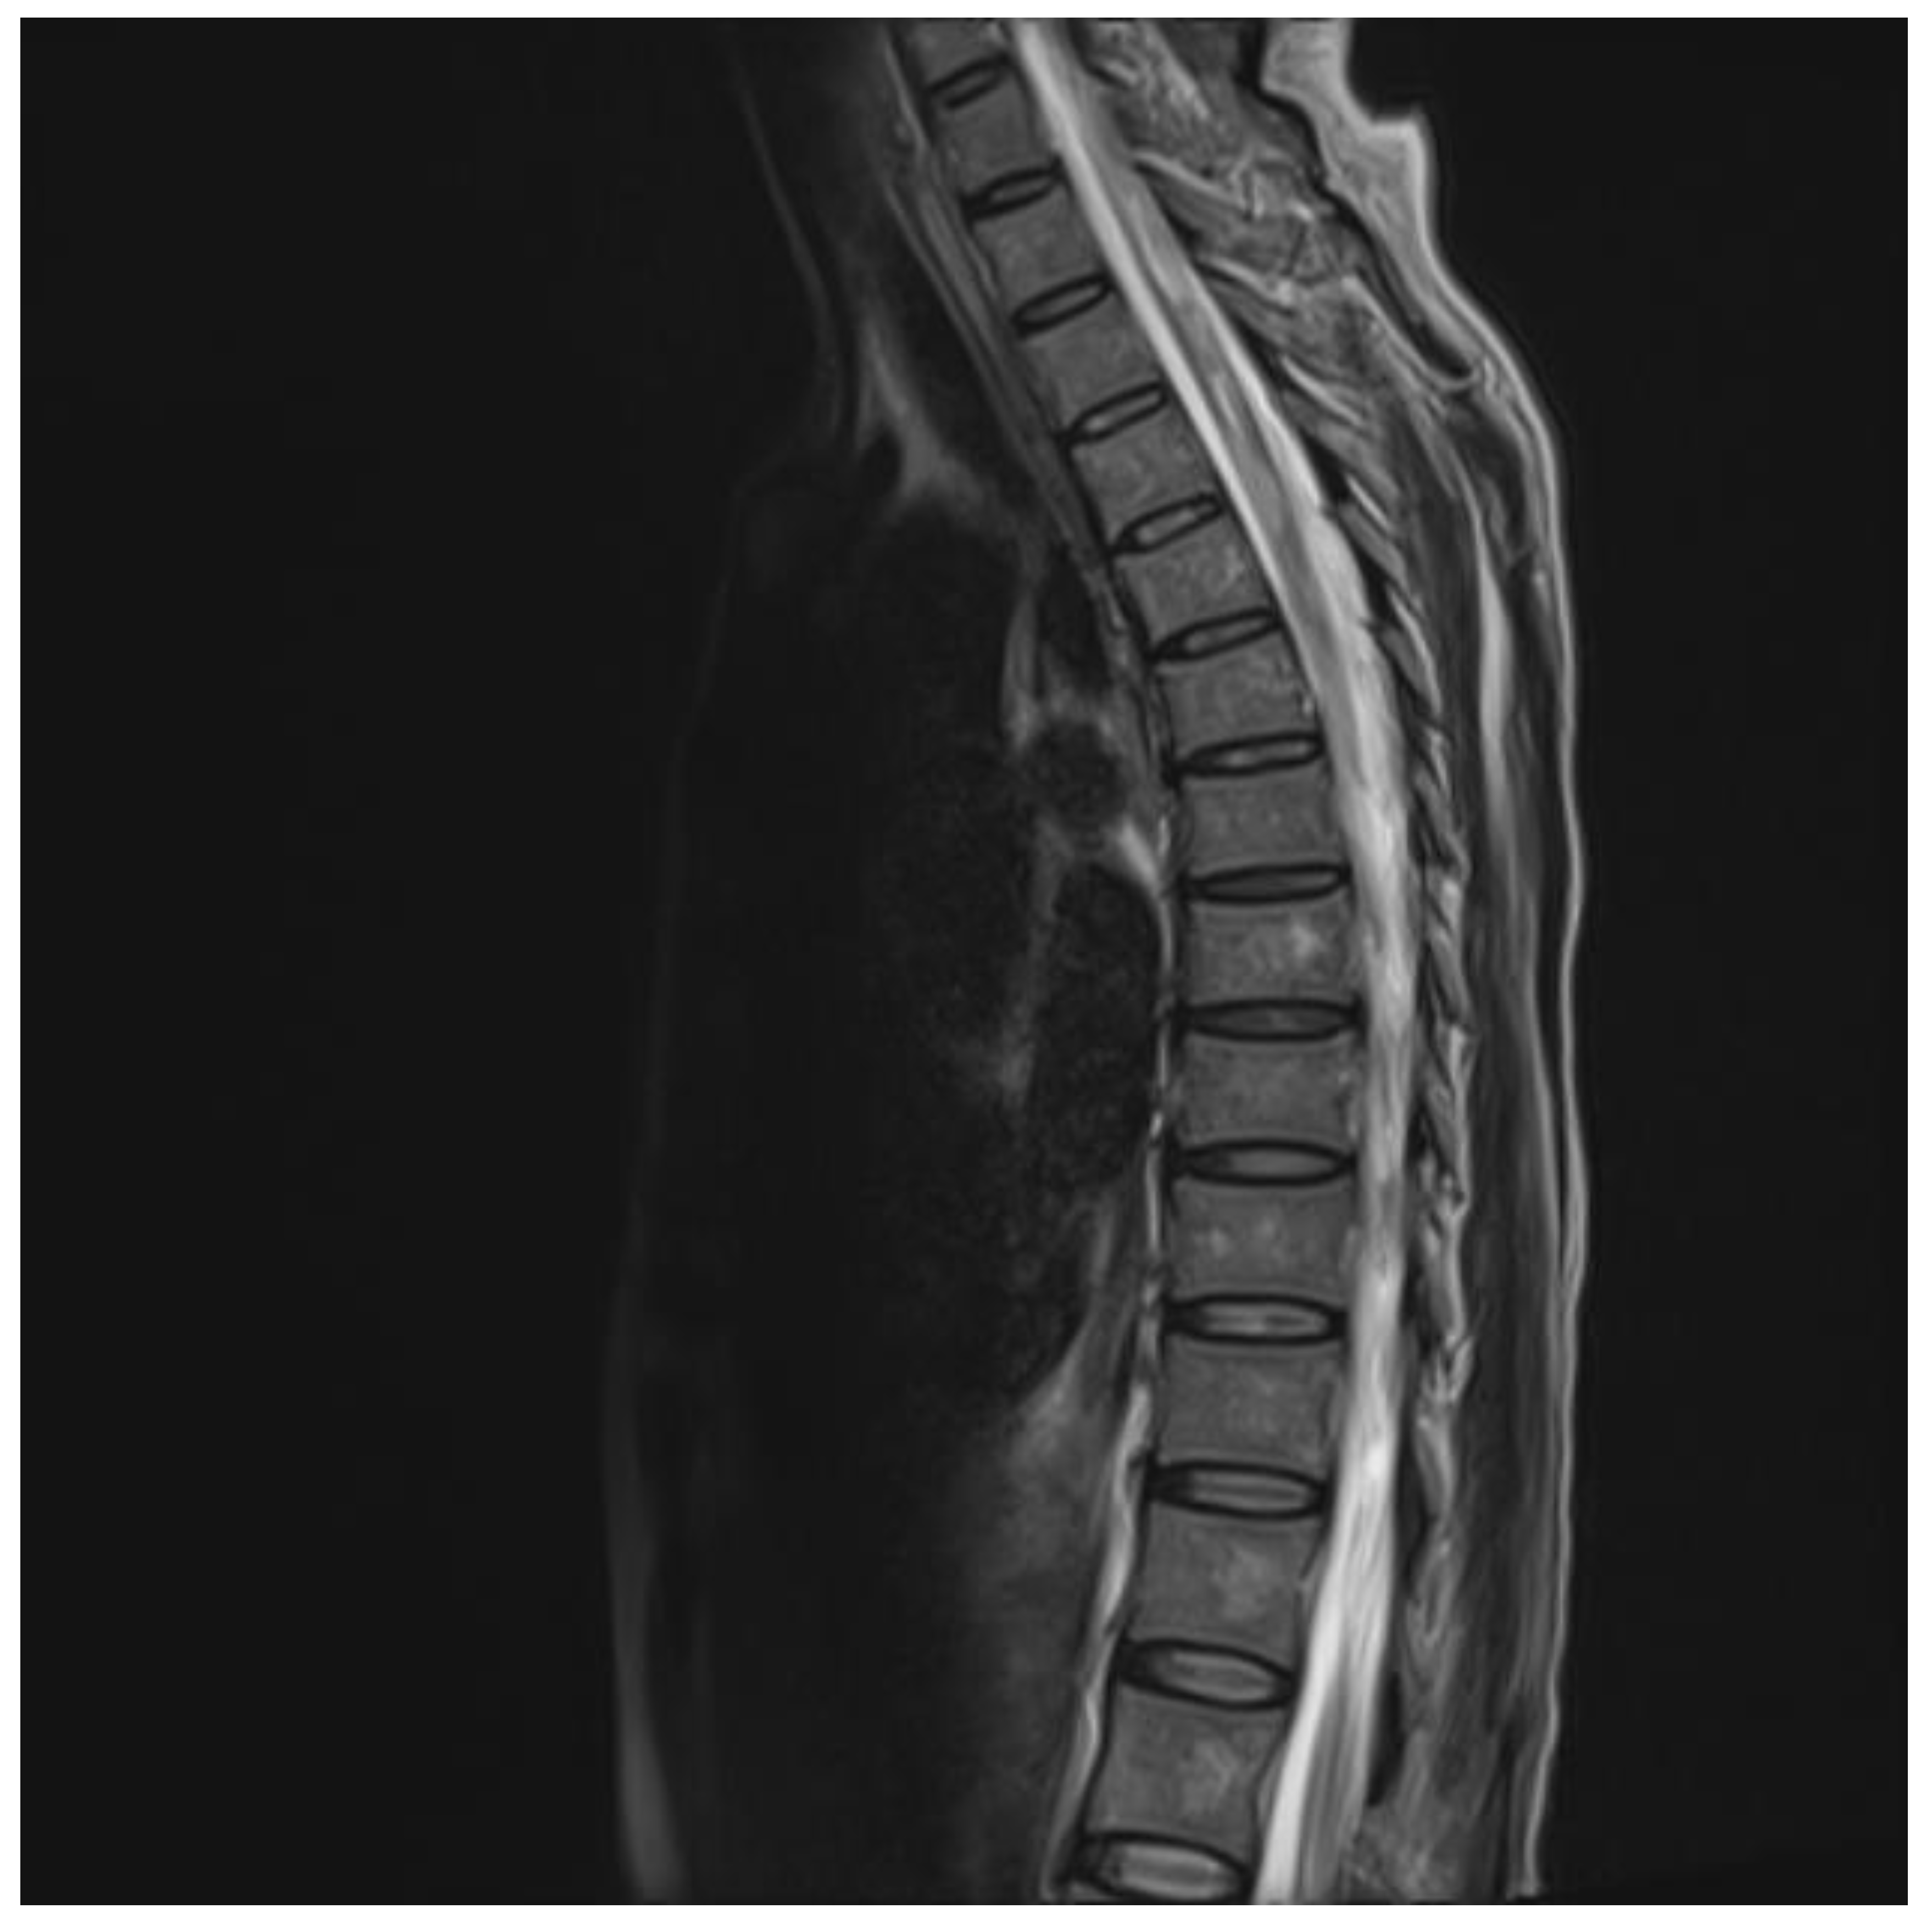 Microbiology Research | Free Full-Text | Longitudinally Extensive  Transverse Myelitis Associated with Cytomegalovirus Infection in an  Immunocompetent Patient